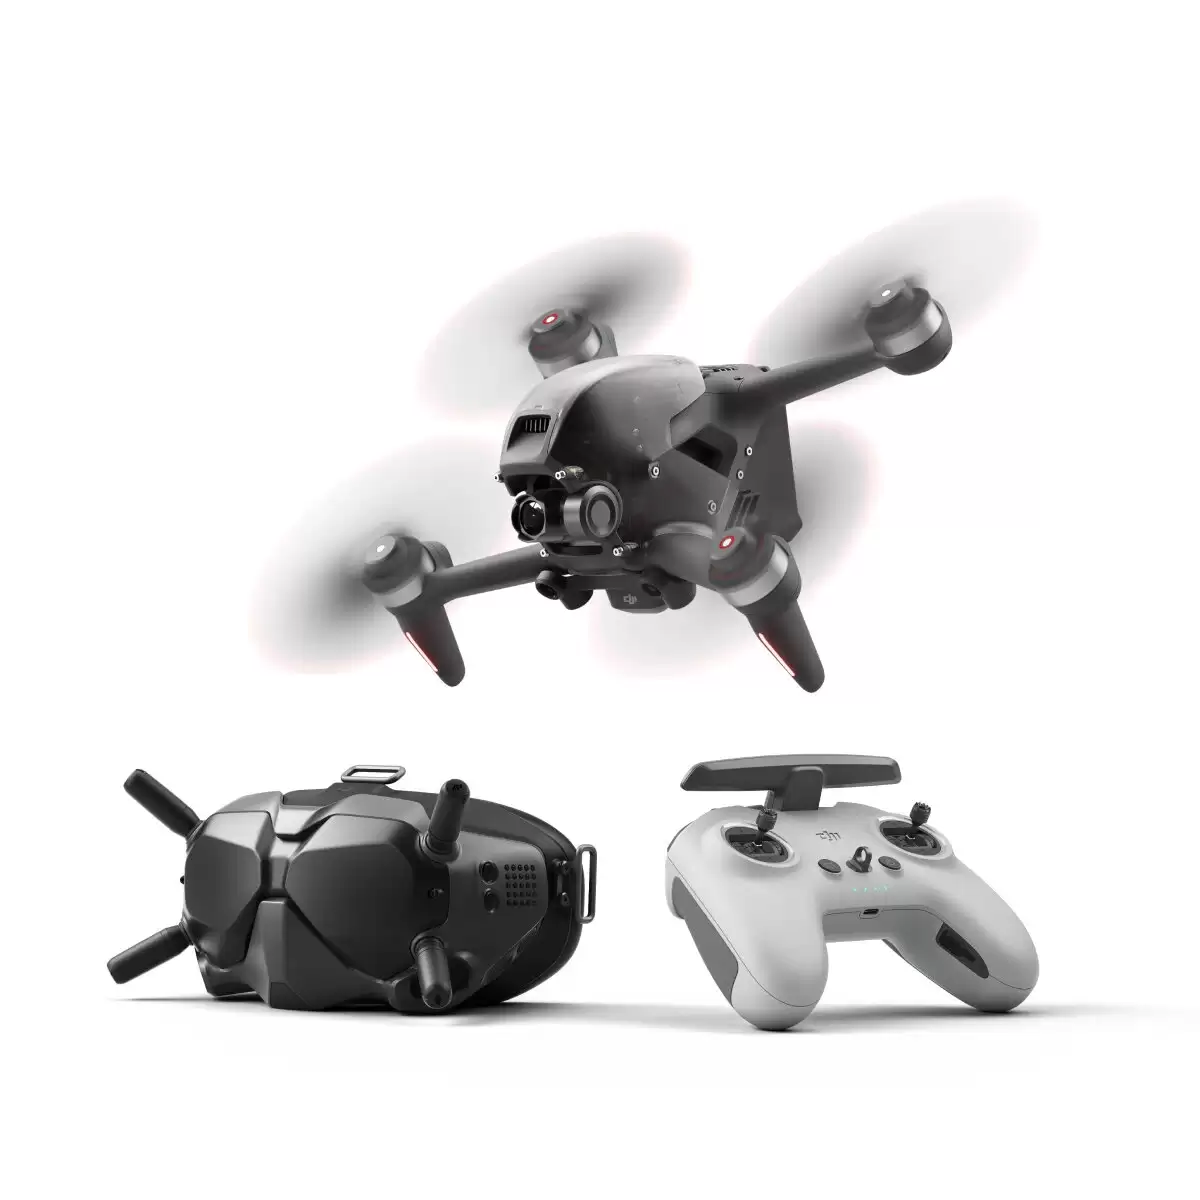 Order In Just Us$1,389.05 Dji Fpv Combo 10km 1080p Fpv 4k 60fps 150° Fov Camera 20mins Flight Time 140 Km/h Speed Fpv Drone Rc Quadcopter Fpv Goggles V2 5.8ghz Transmitter Mode2 With This Coupon At Banggood